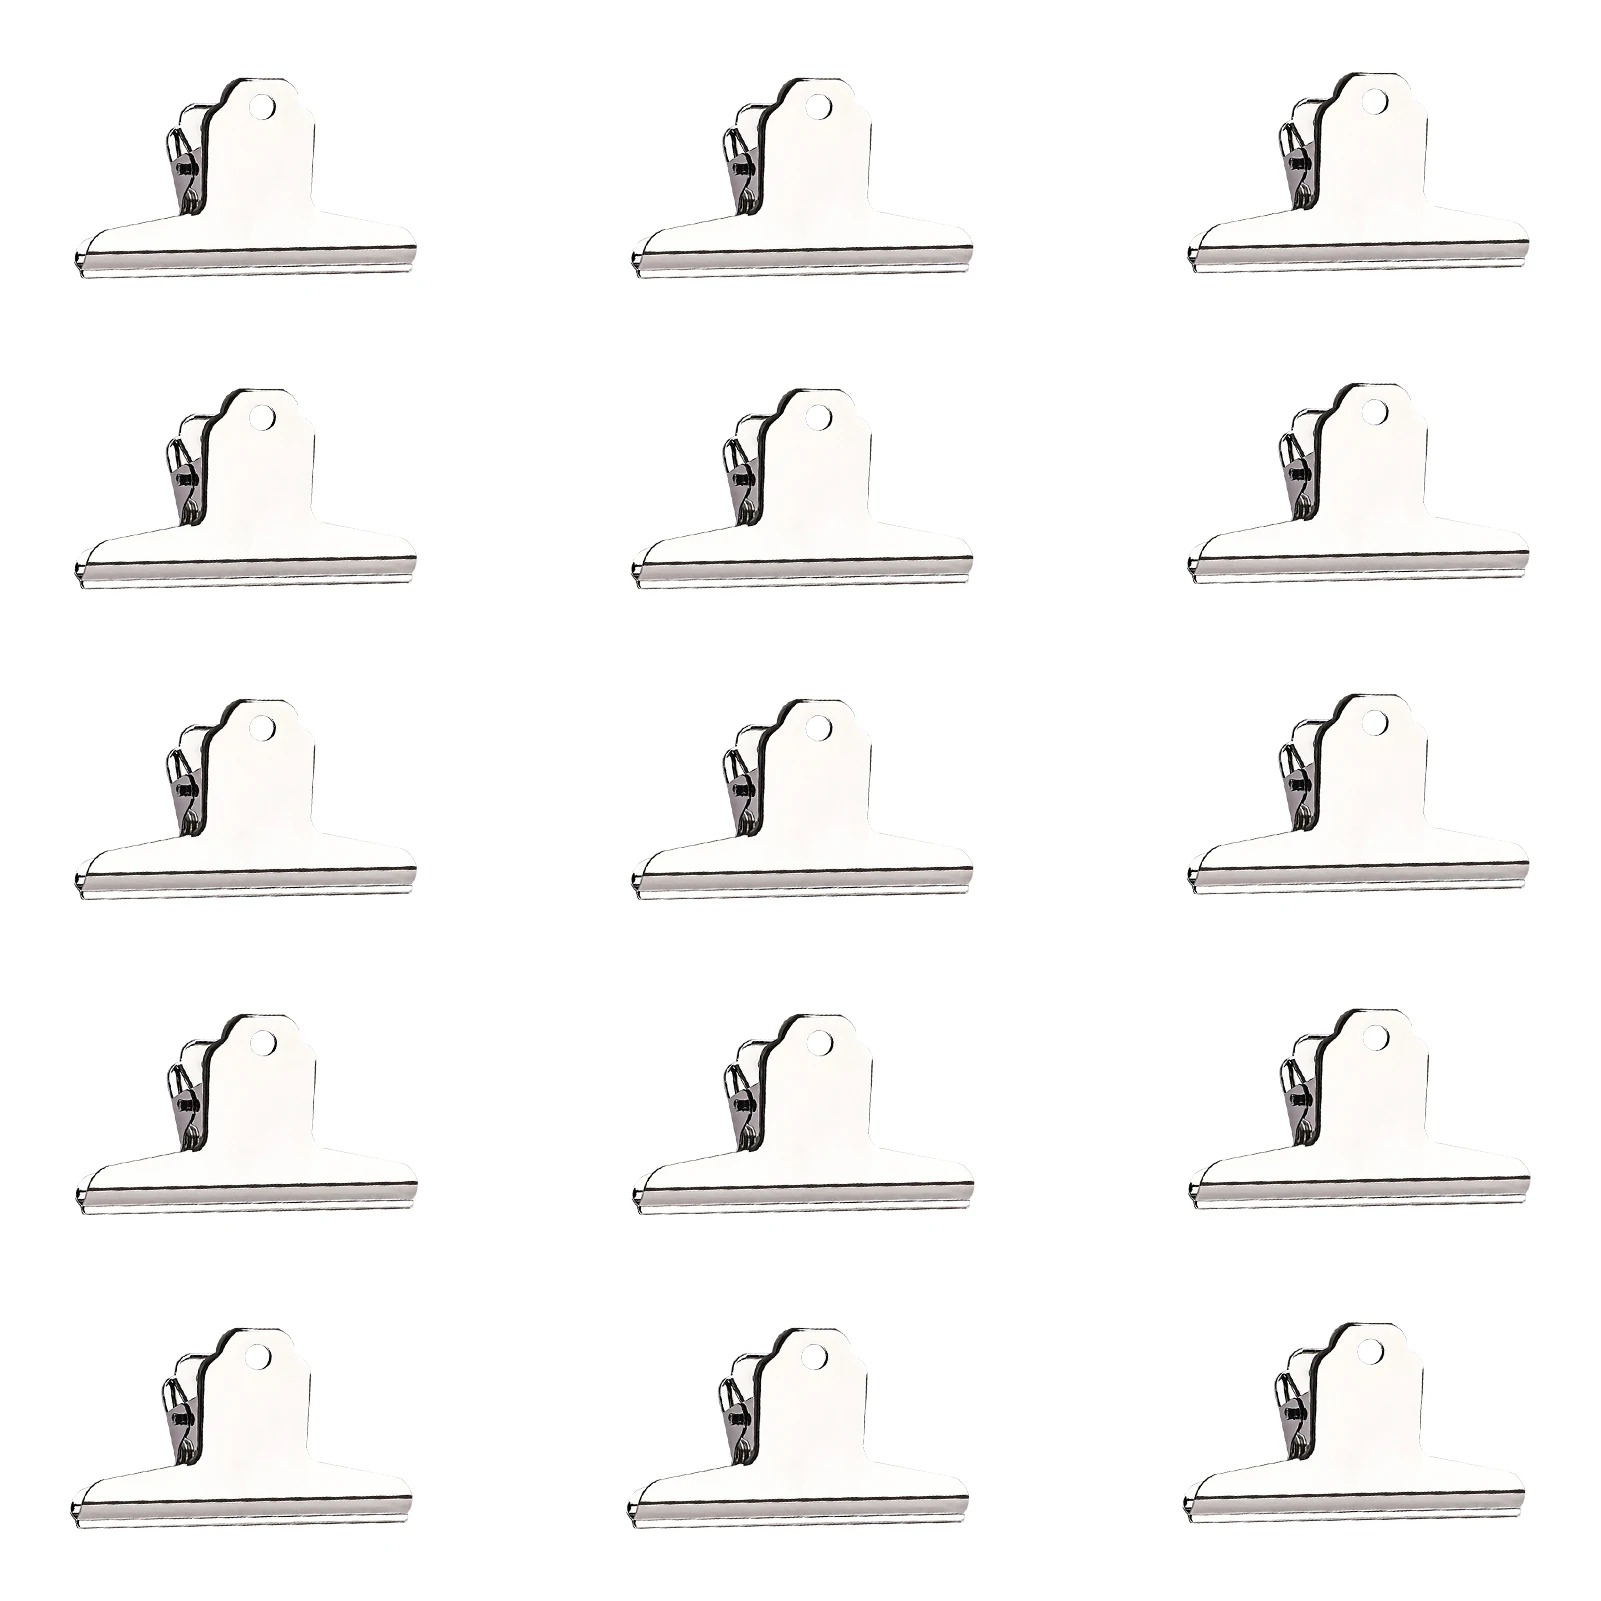 

15pcs 120mm Stainless Steel Large Metal Pictures Photos Silver Tone Portable Binding Supplies Home Office Binder Clips Solid